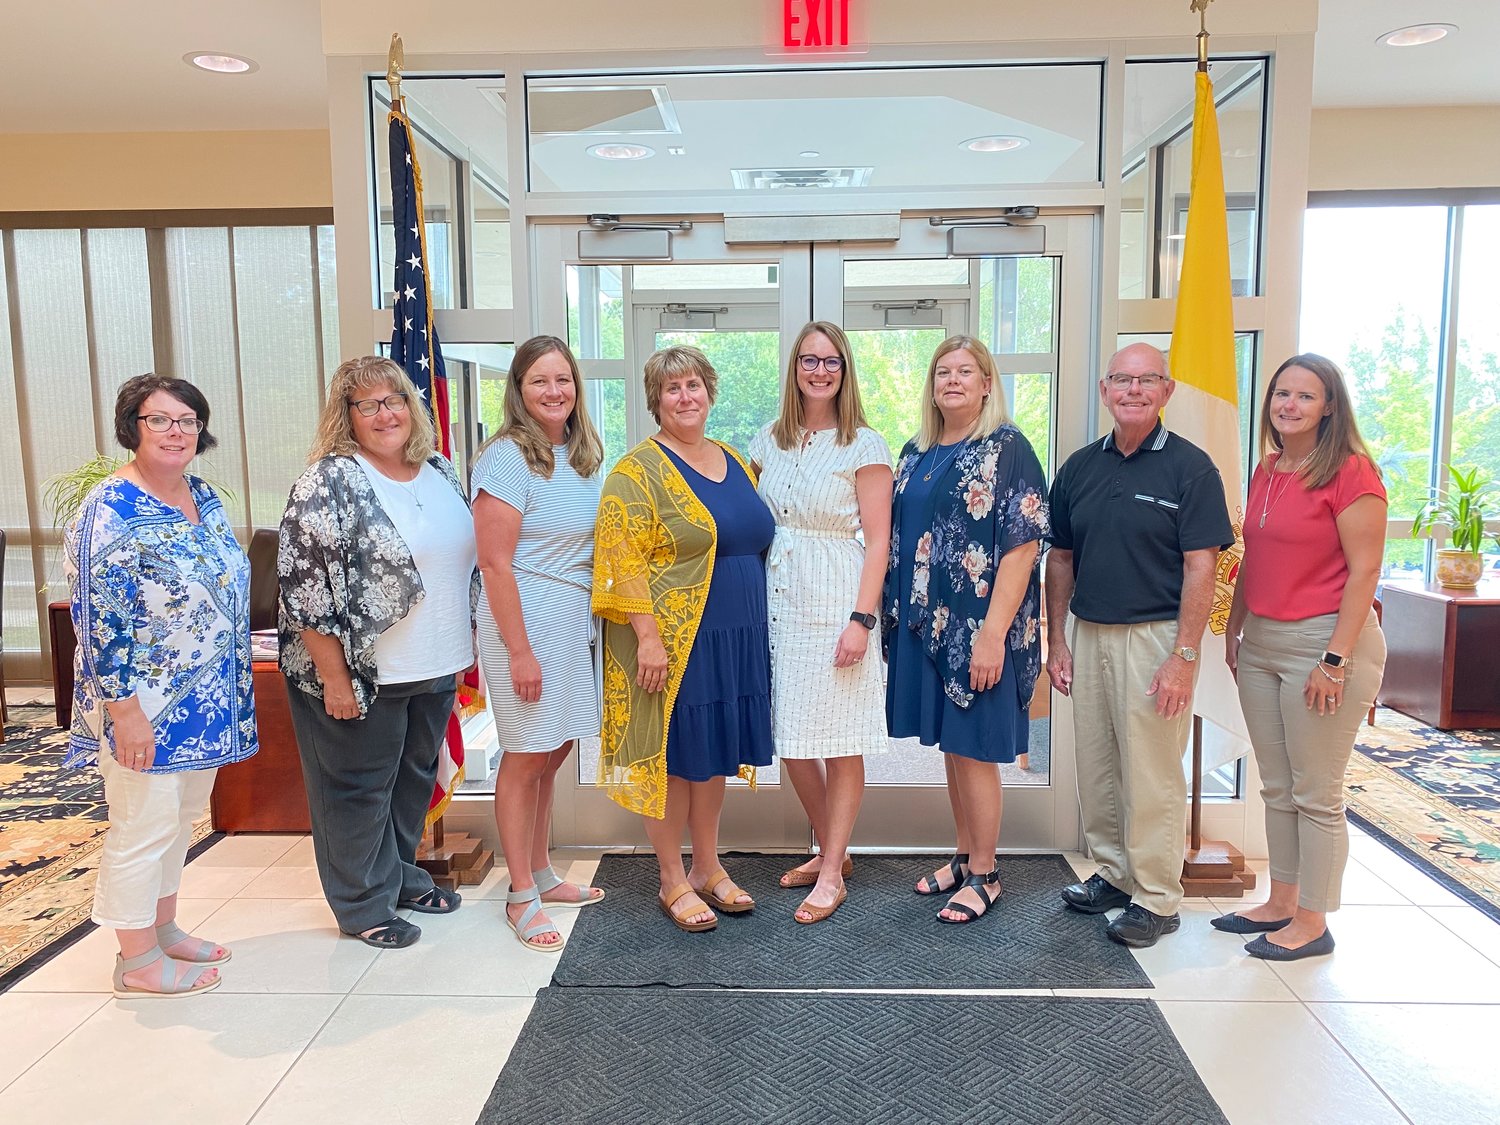 Lisa Grellner, principal of St. George School in Linn and St. Mary School in Frankenstein; Leigh Ann Grant, principal of Immaculate Conception School in Macon; Nancy Shively, principal of Holy Rosary School in Monroe City; Lucinda Varner, principal of Our Lady of the Snows School in Mary’s Home; Amy Scherbaum, principal of St. George School in Hermann; Nancy Manning, principal of Sacred Heart School in Sedalia; Dick Davis, principal of Fr. McCartan Memorial School in Marceline; and Abby Martin, principal of Ss. Peter and Paul School in Boonville. 